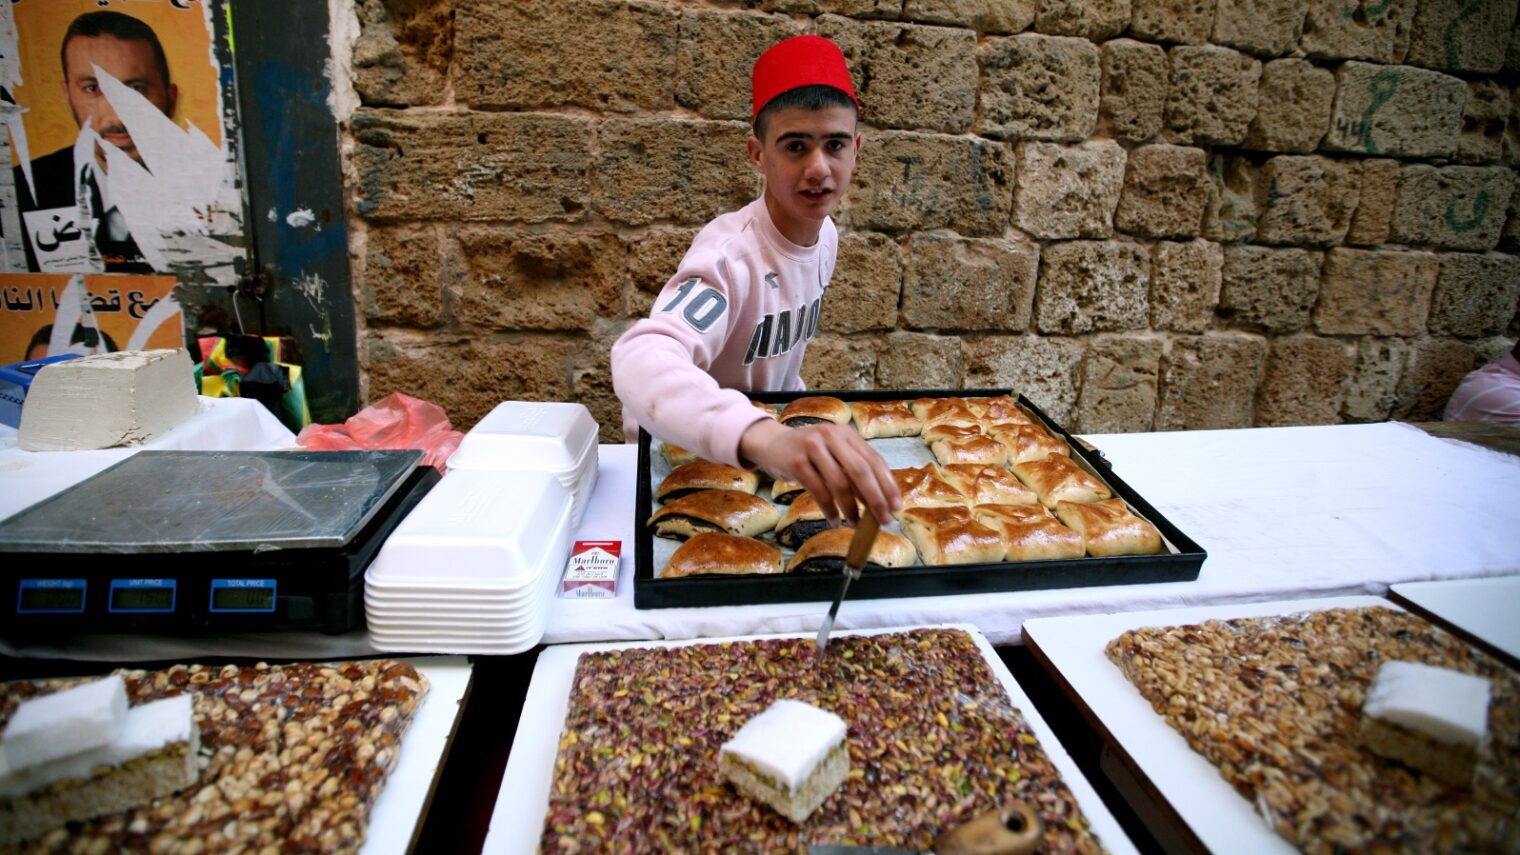 A young man selling sweets at the Old City of Acre. Photo by Moshe Shai/FLASH90